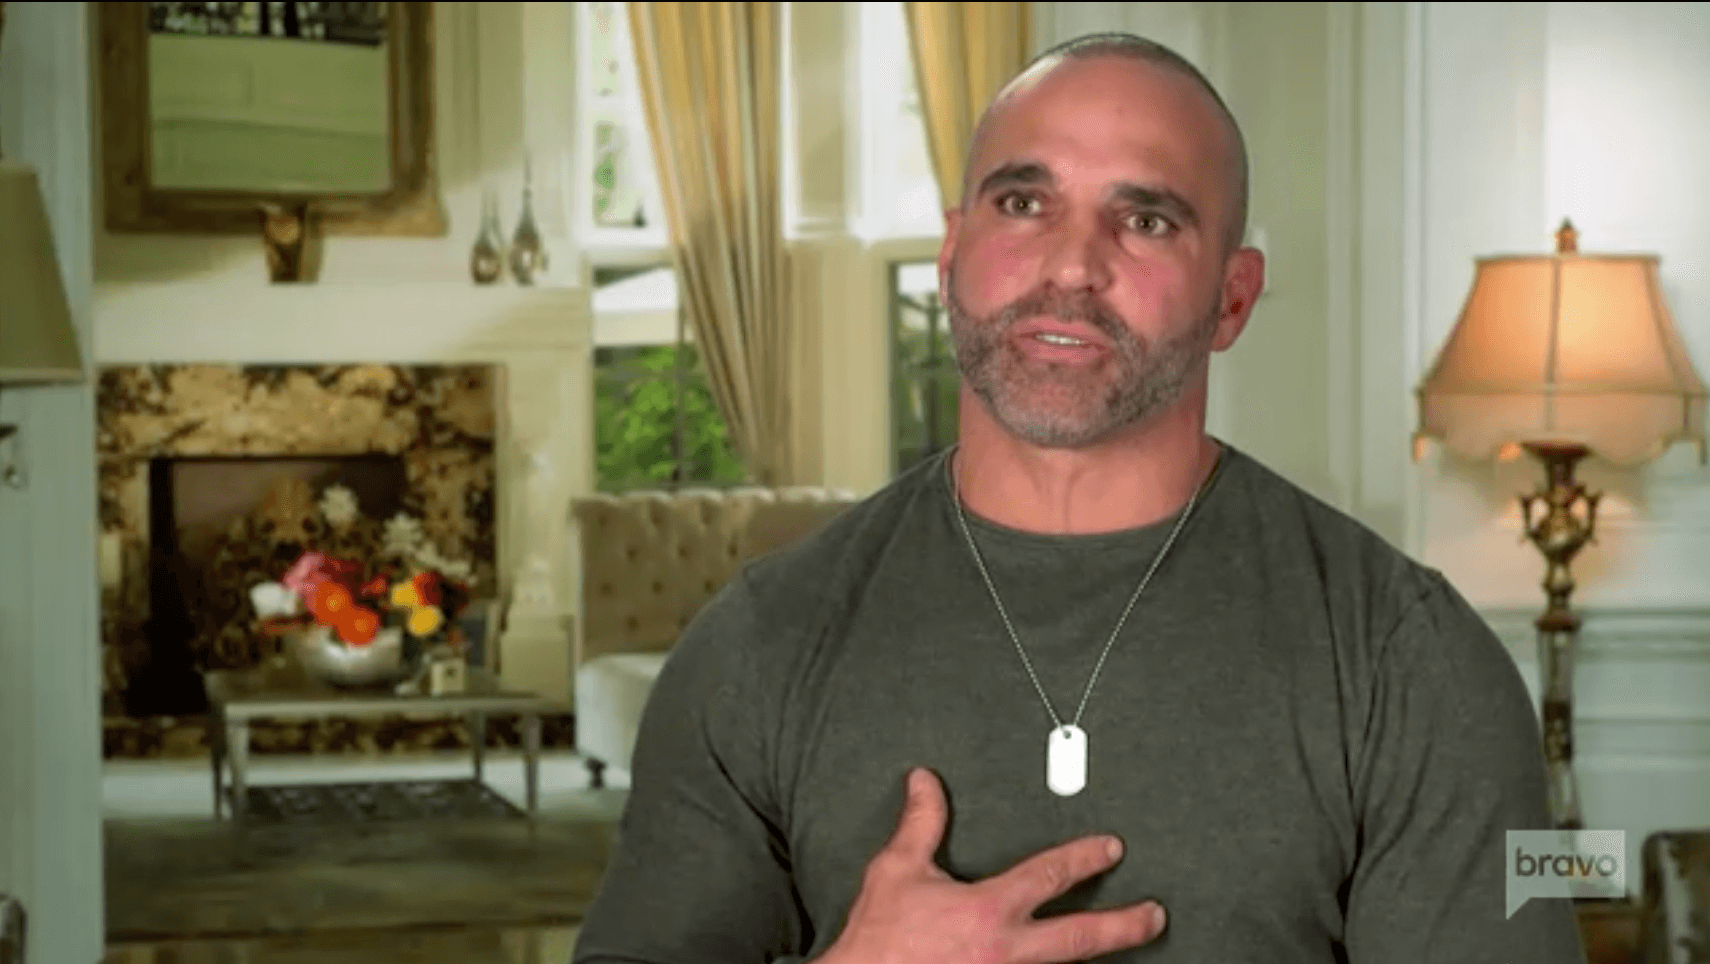 ‘RHONJ’ RECAP: Joe Gorga Claims Wife Melissa Has ‘Changed’ and ‘Turned into This Different’ Woman!